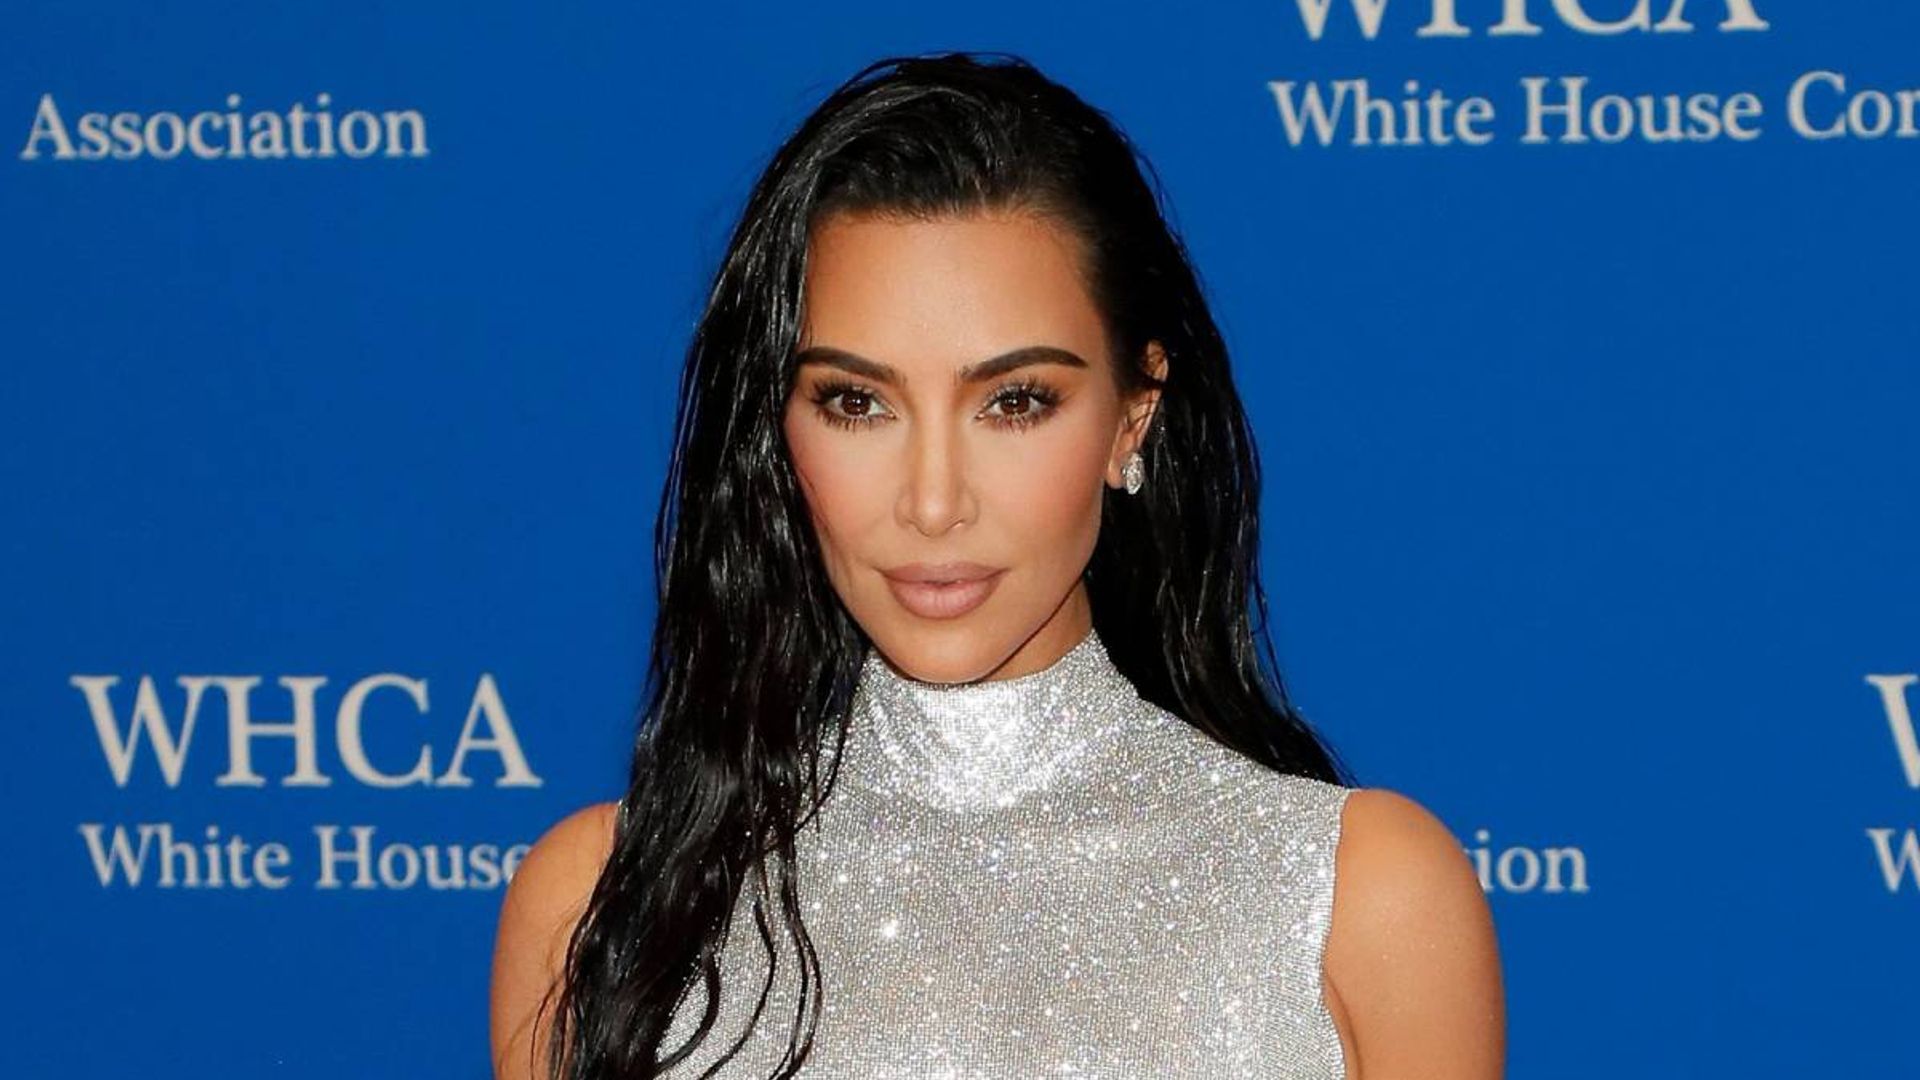 Kim Kardashian condemns hate speech following Kanye West's anti-Semitic comments